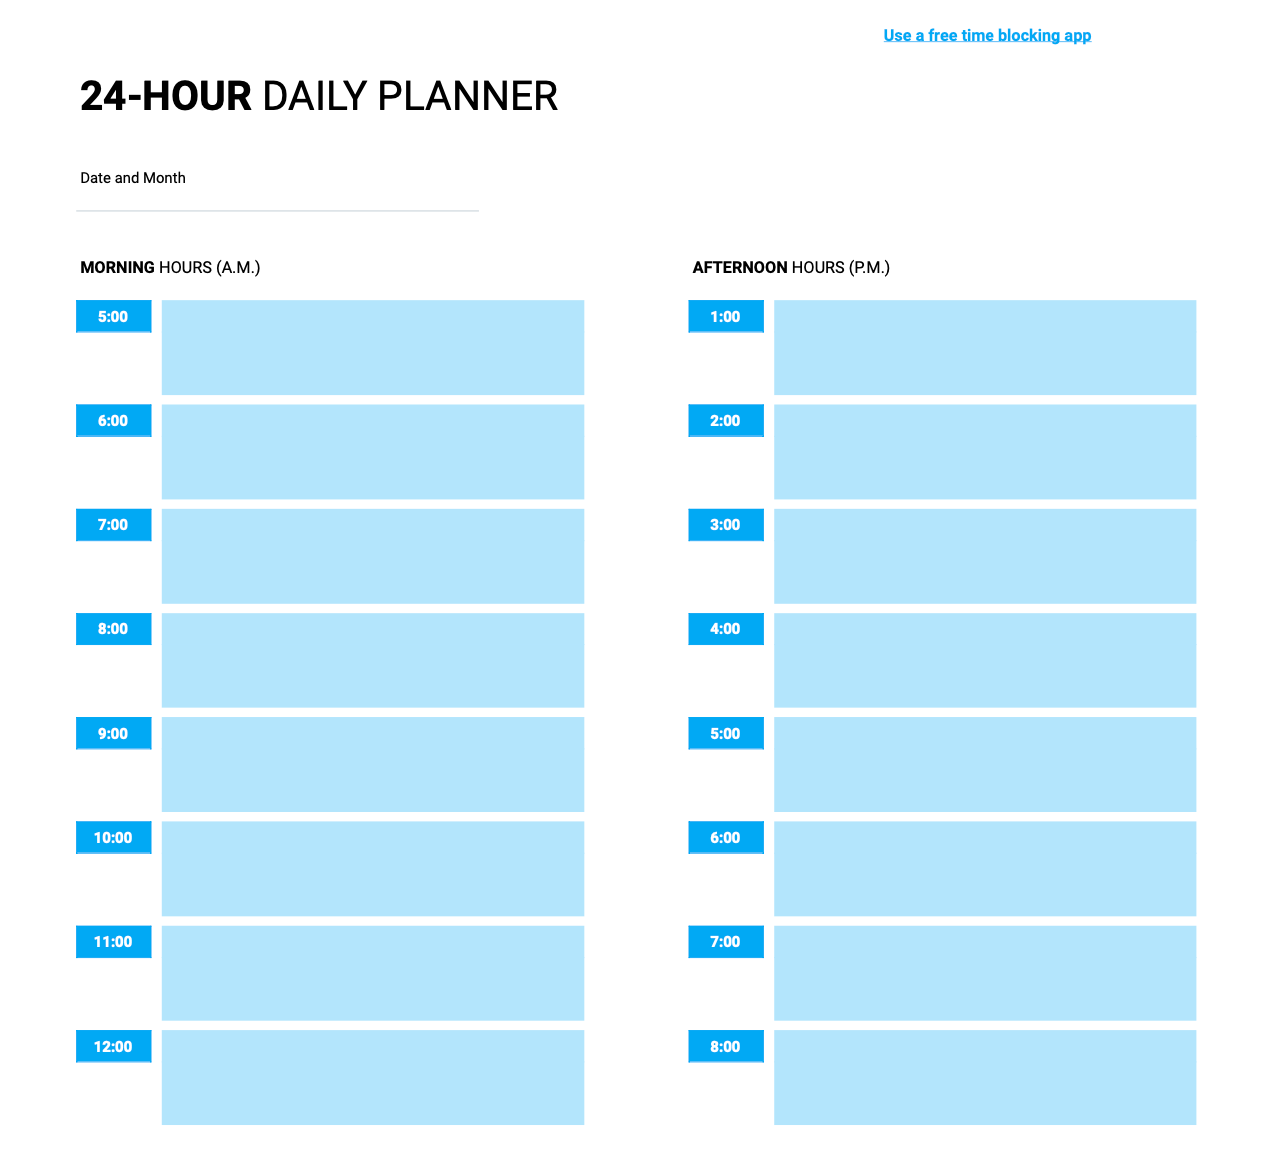 24-hour daily planner